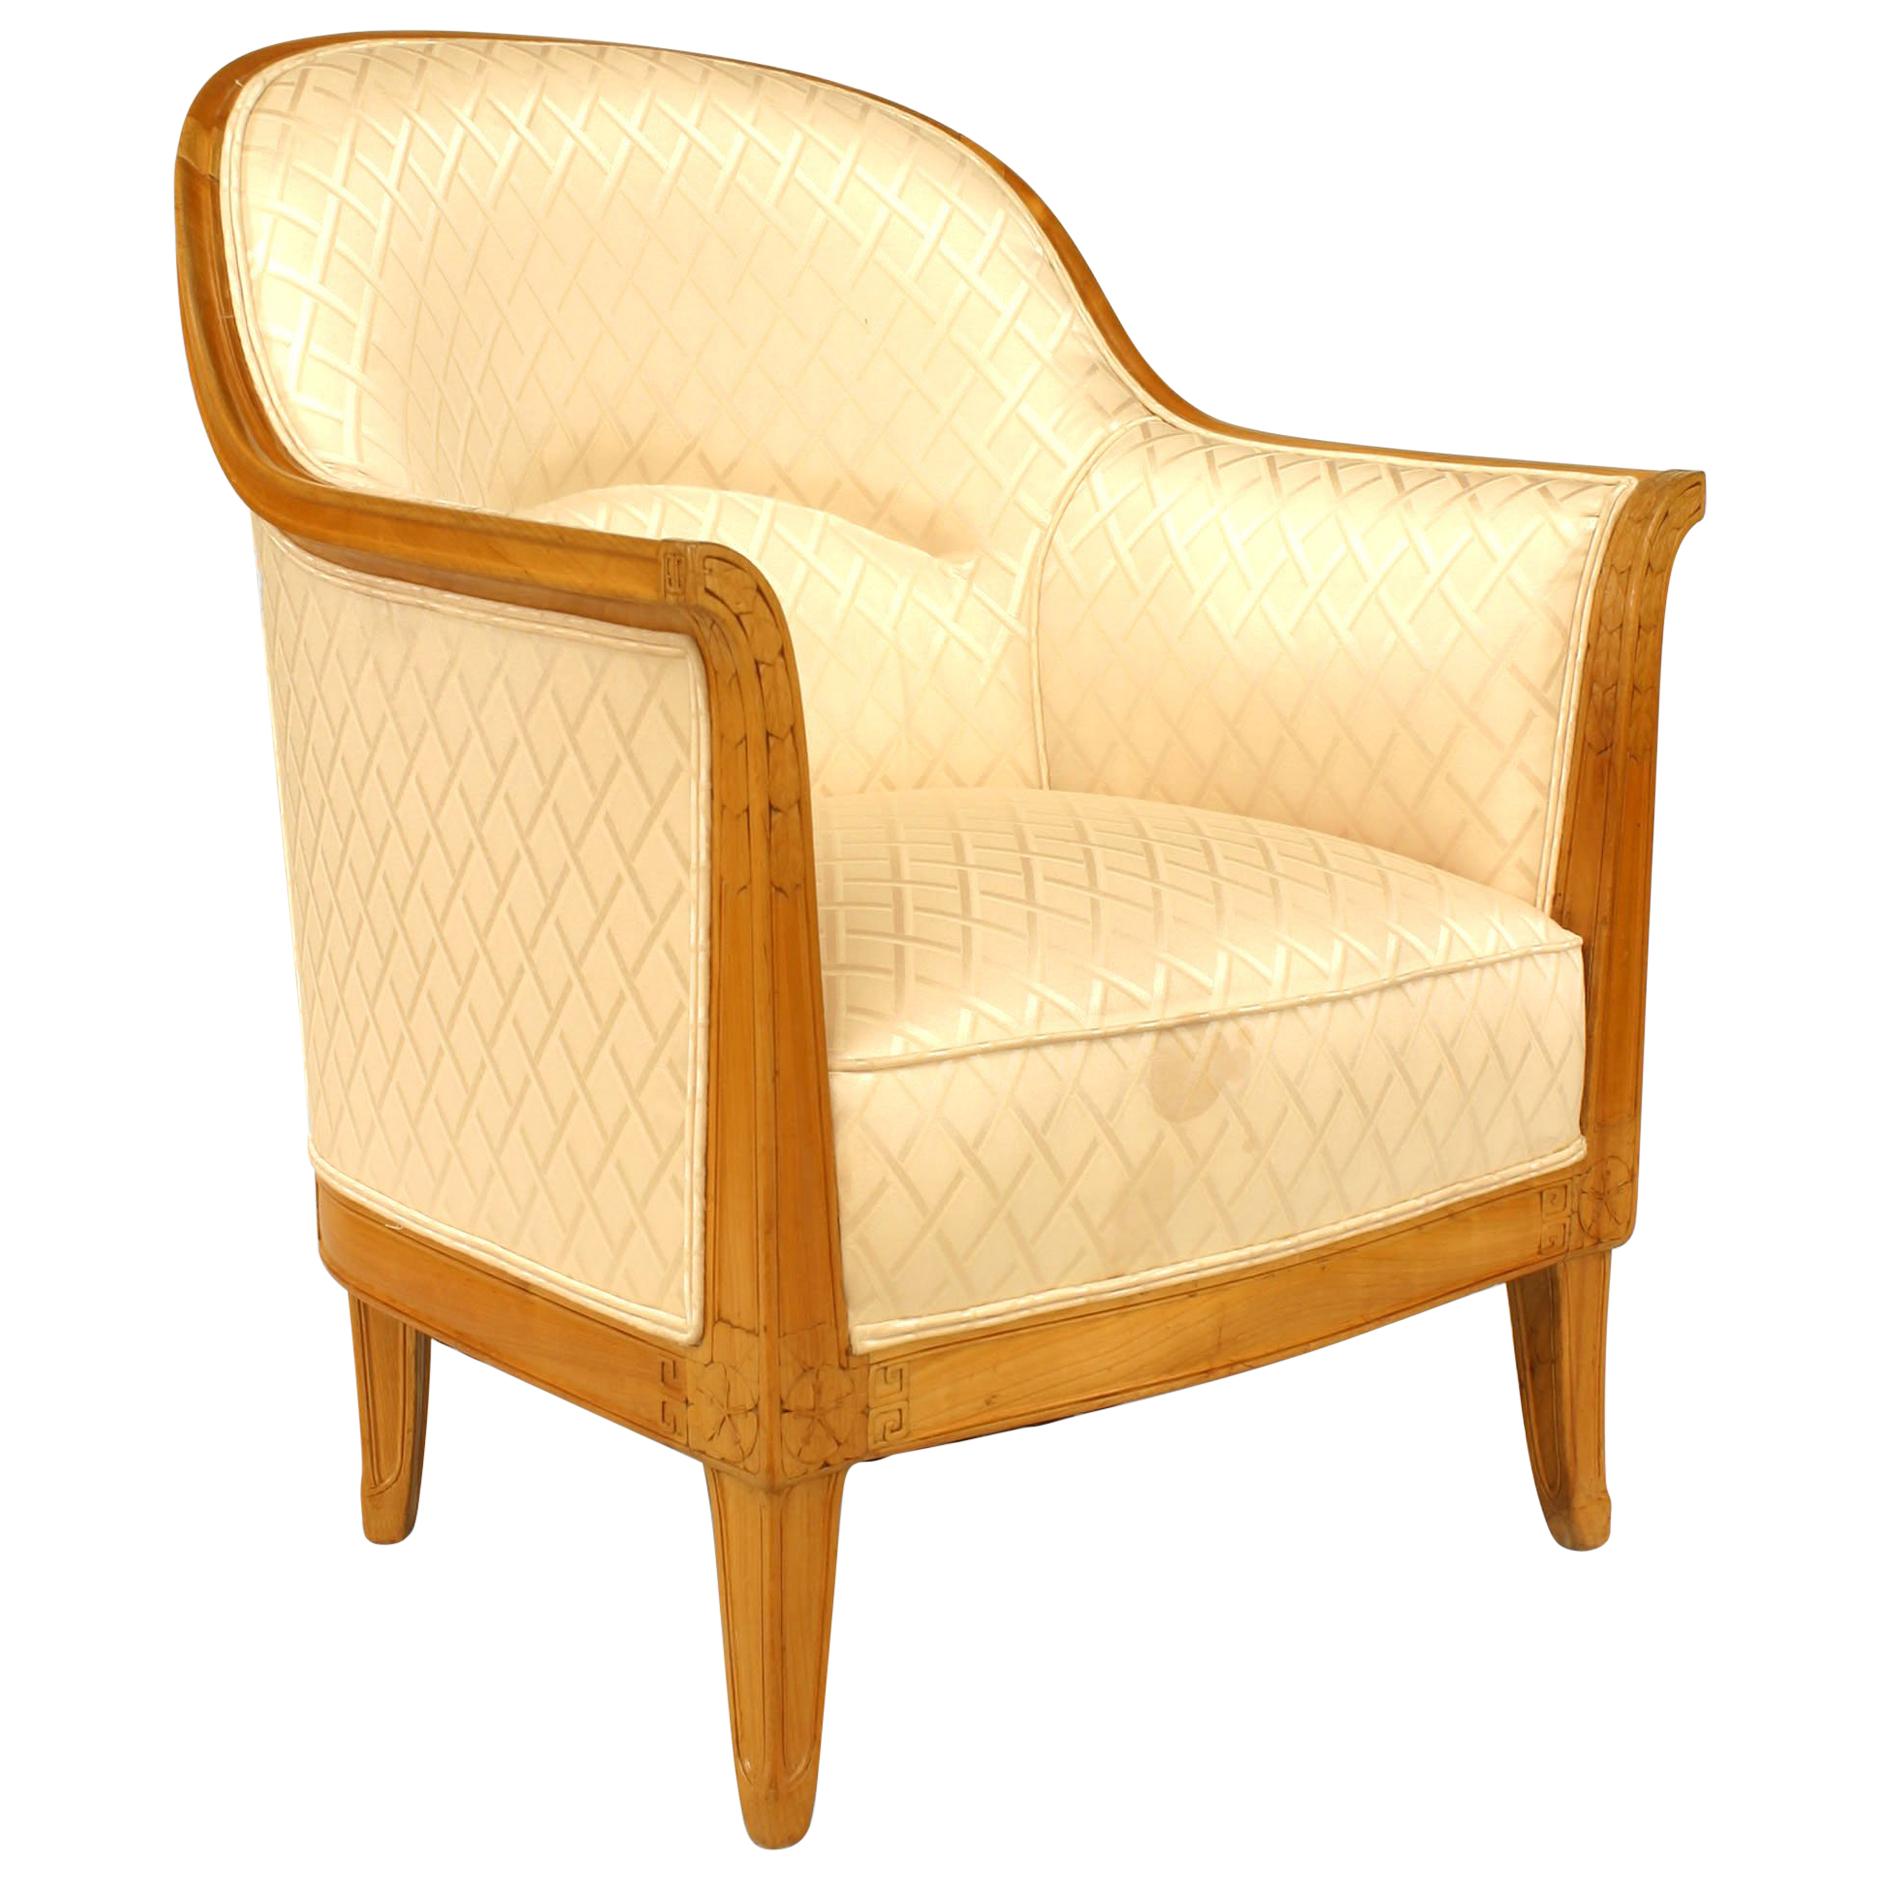 Jallot French Art Deco Berg√©re Arm Chair